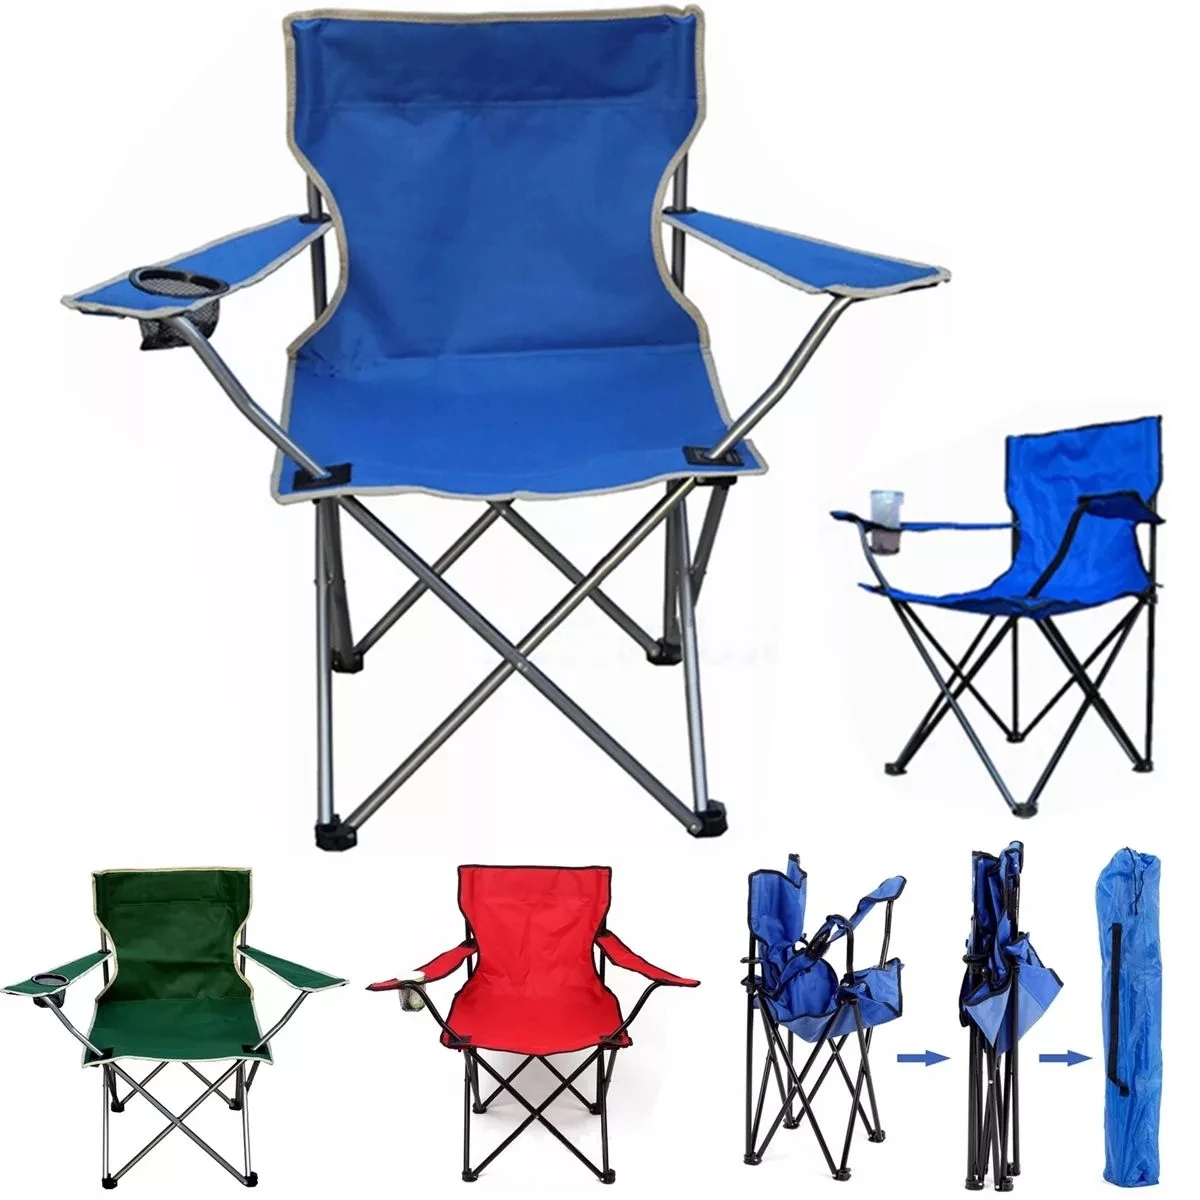 Adjustable Portable Lightweight Folding Stool Fishing Camp Picnic Chair X-shaped 